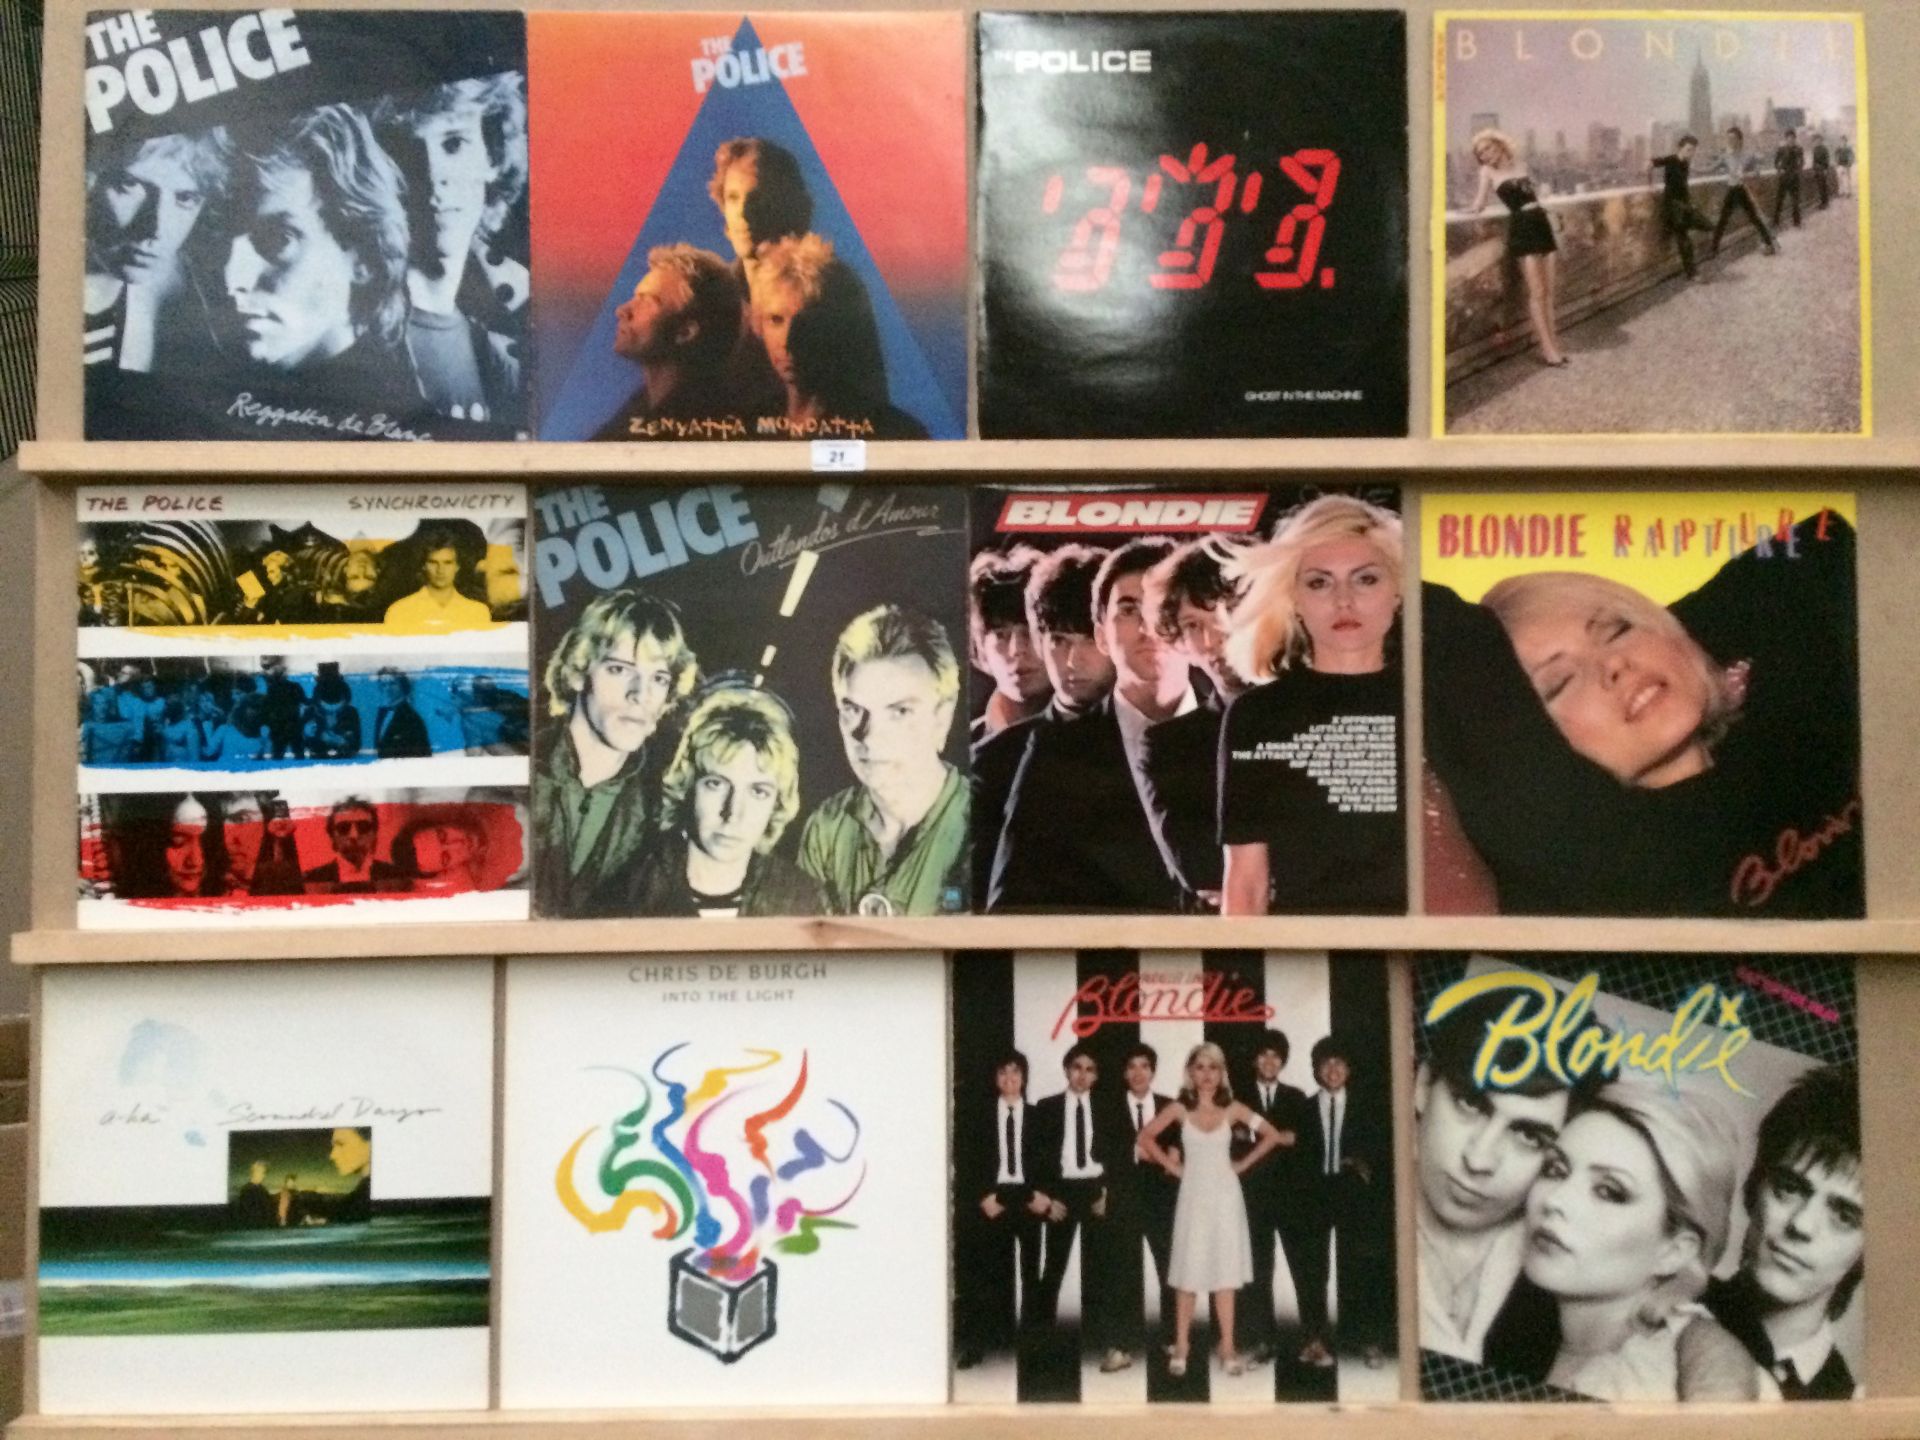 11 LP's and a Blondie 12" single - Mainly Police and Blondie